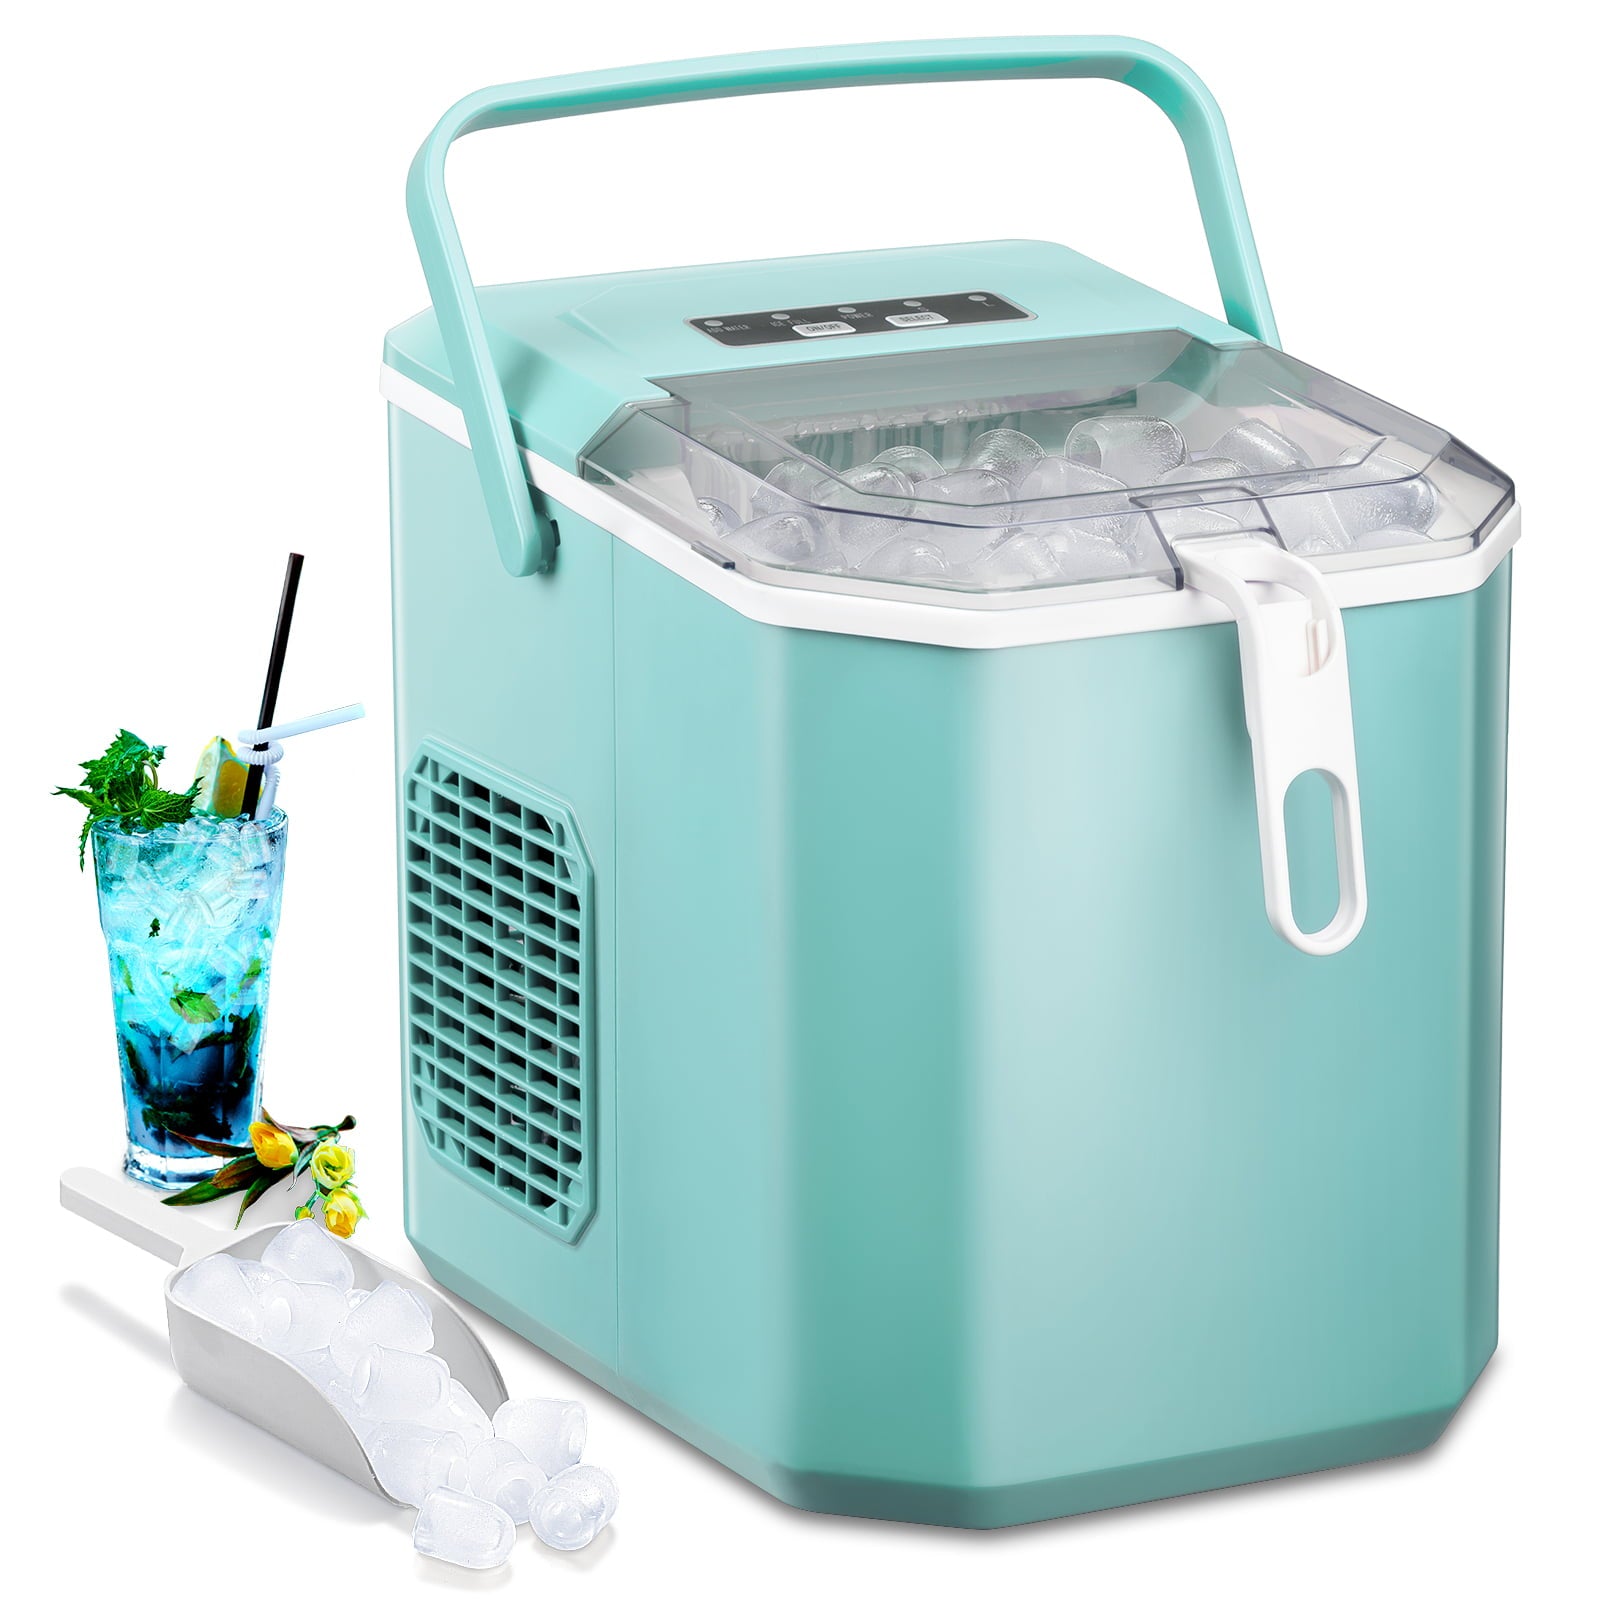 Kndko 26lbs Countertop Ice Maker, Bullet Ice Type in 2 Sizes(S/L), Self-Cleaning Handheld Ice Basket, Green